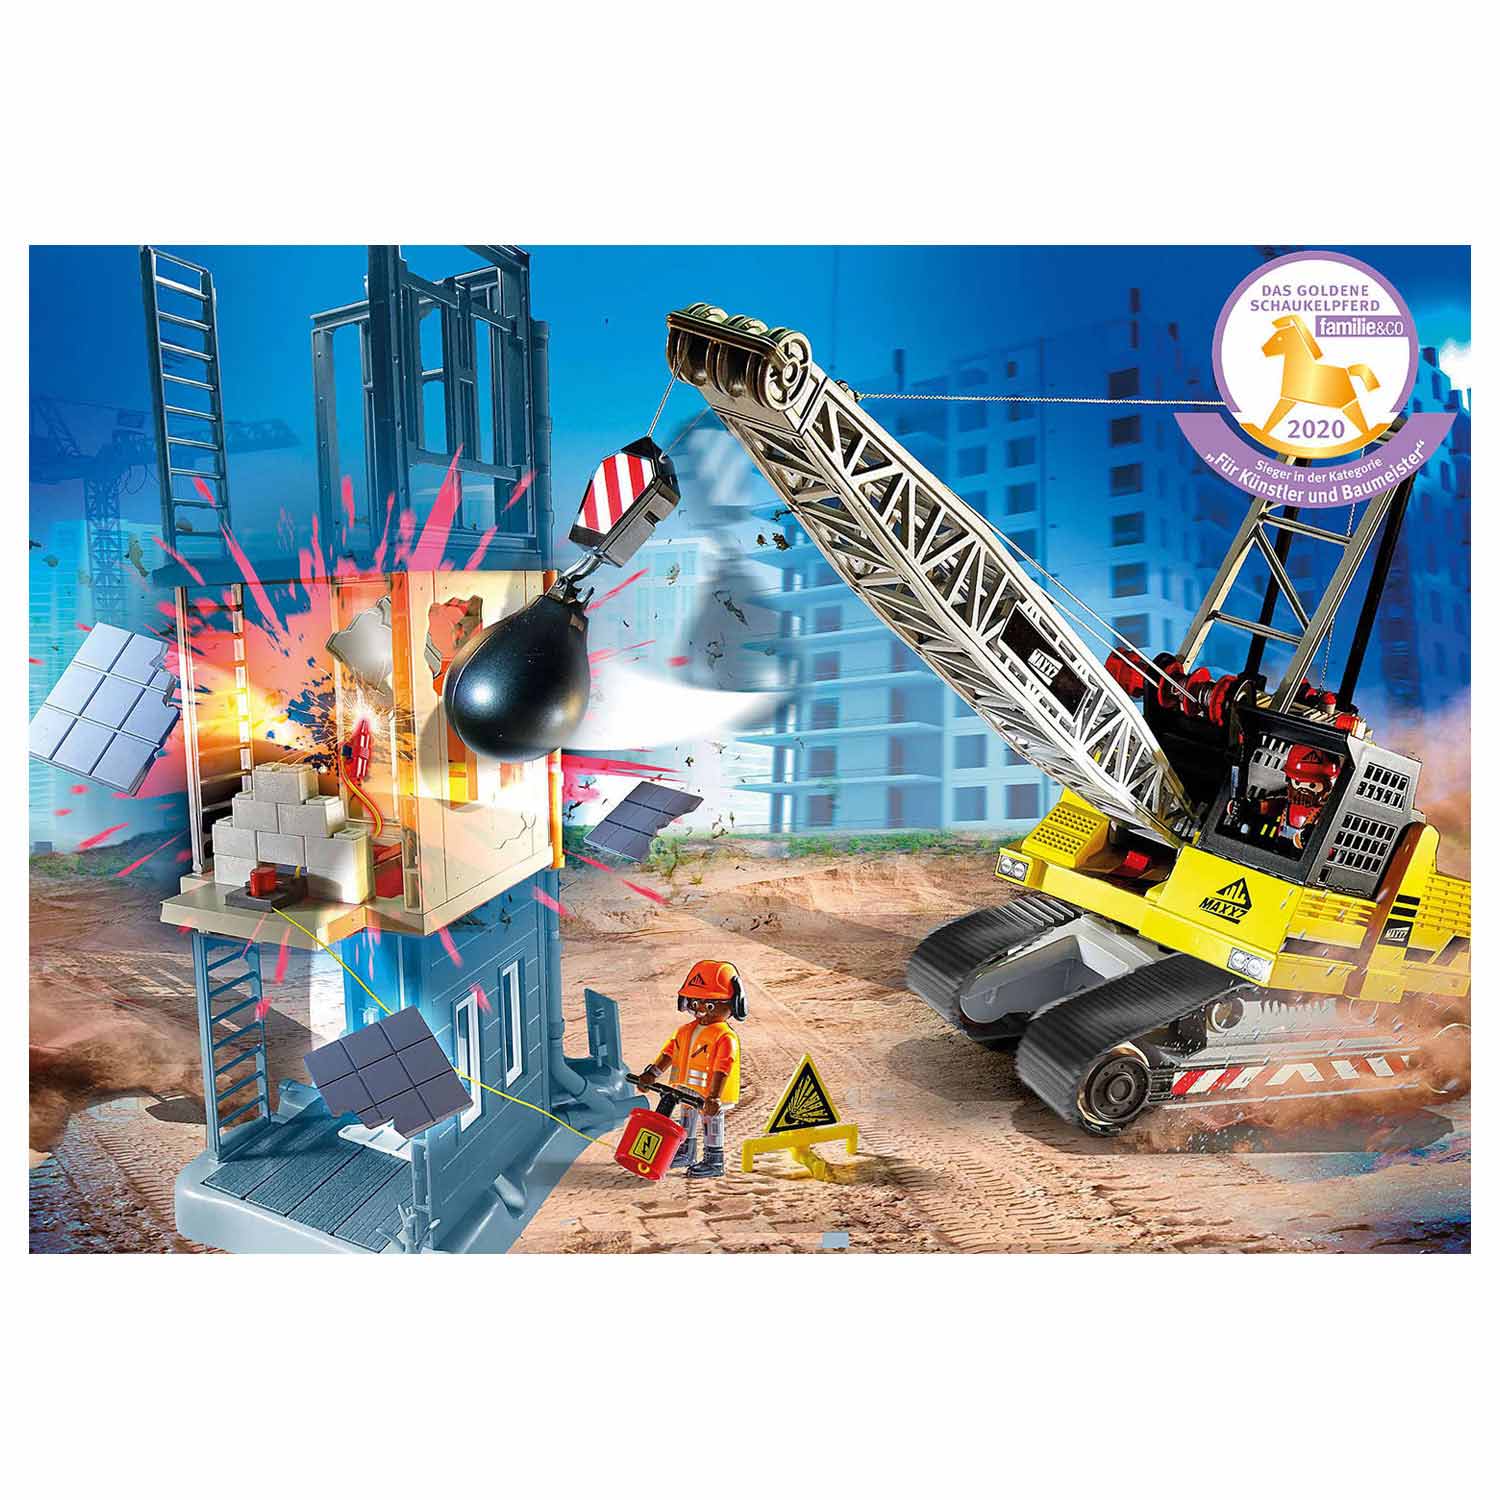 Playmobil City Action - Construction worker with edge cutter - 7